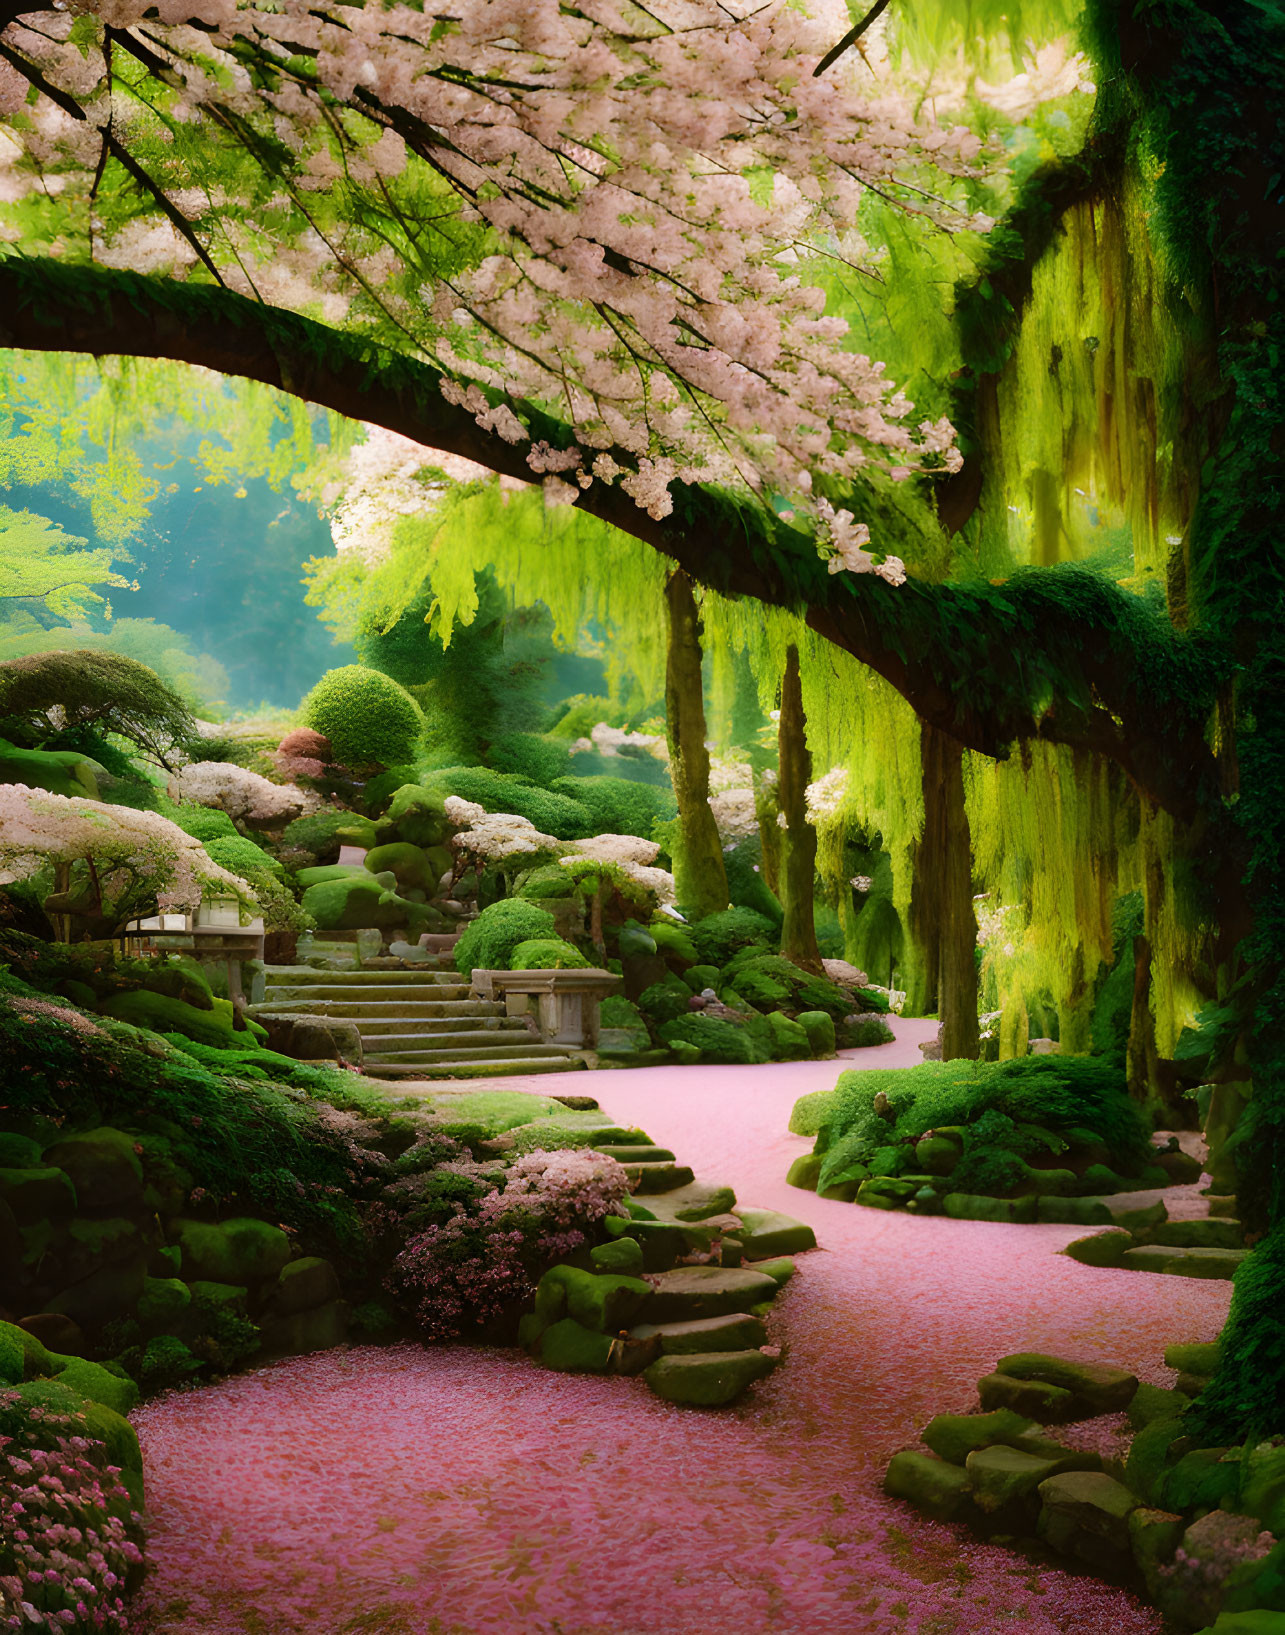 Tranquil garden path with pink cherry blossoms, mossy trees, and manicured shrub